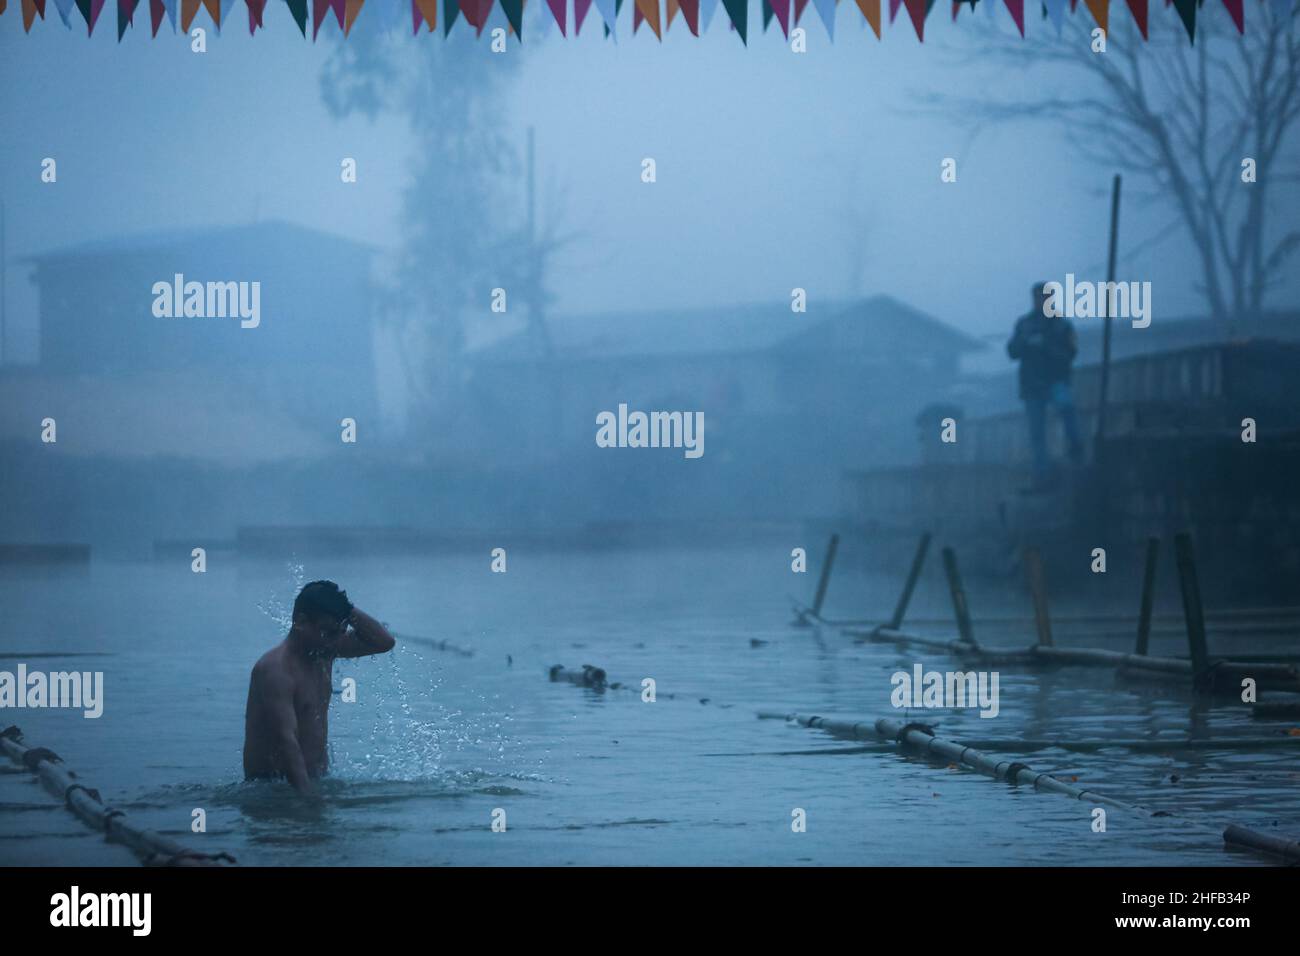 Bhaktapur, Bagmati, Nepal. 15th Jan, 2022. Hindu devotes bathed into the frigid waters during the Makar Mela festival in Panauti, Nepal amid a COVID-19 surge.Makar Mela celebrated once for a month in Magh in interval of 12 years has started on the embankments of trijunction of Punayamata, Roshi and Rudrawati River. The fair begins as the sun enters Makar Rashi on the day of Makar Sakranti, as per the Vedic astrology. After taking bath at the Triveni, the devotees worship Basuki Naag and carry water at the snuff box of the hand and climb up the Gorakhnath Hill to offer water from Triveni. (C Stock Photo